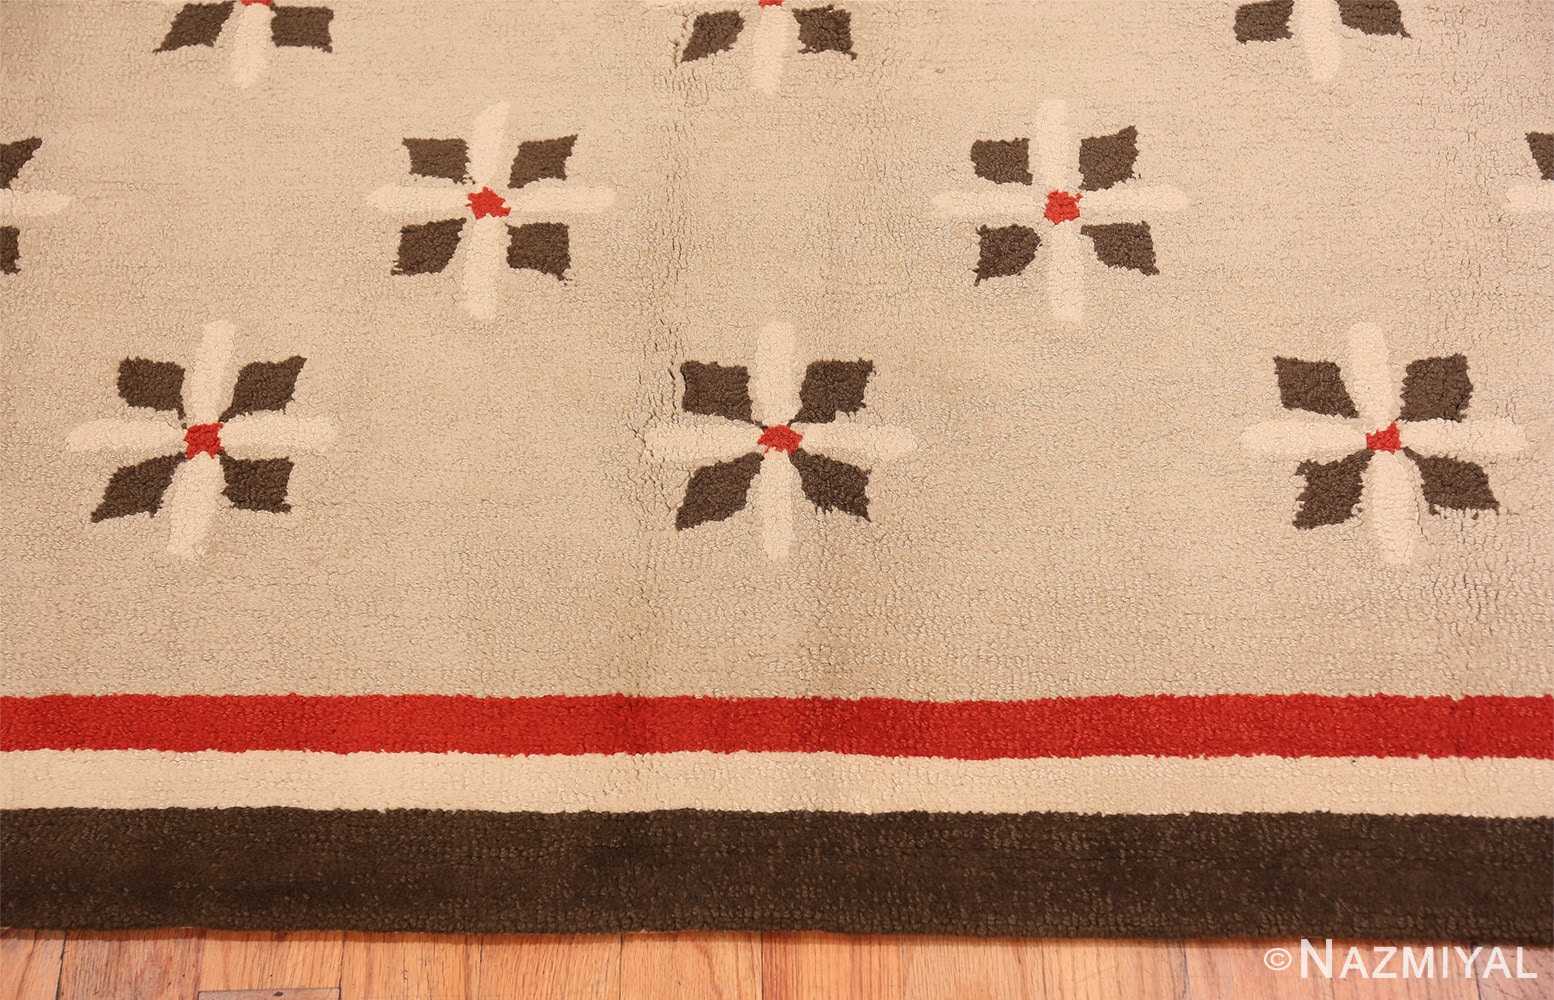 Border Antique Deco American hooked rug 2714 by Nazmiyal